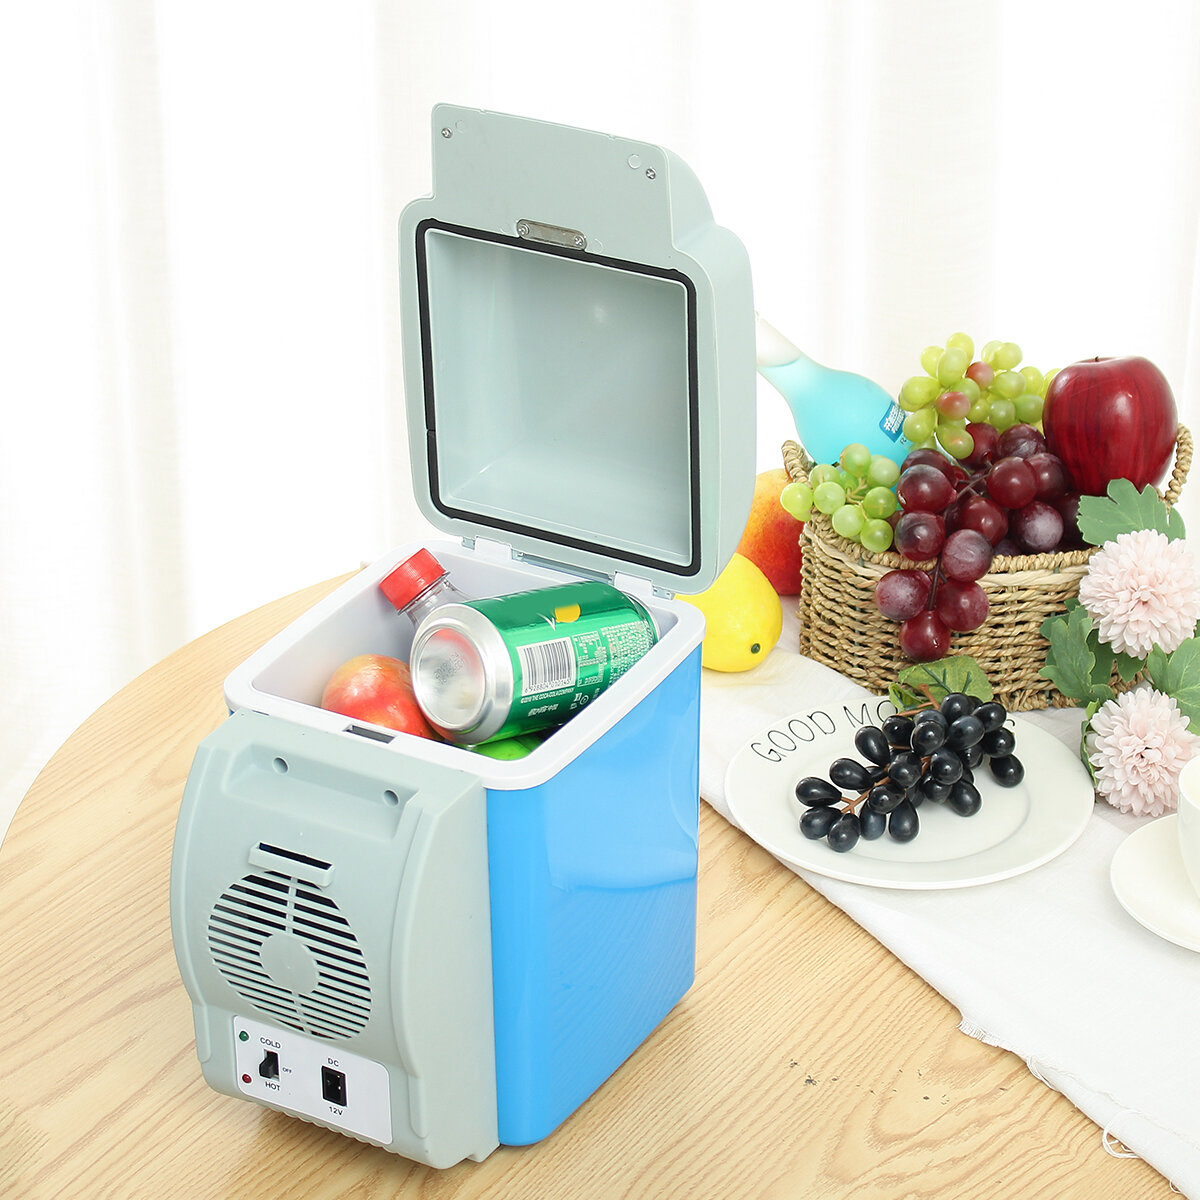 12V 7.5L Portable Vehicle Refrigerator Dual-use Heating & Cooling Freezer For Outdoor Camping Travelling